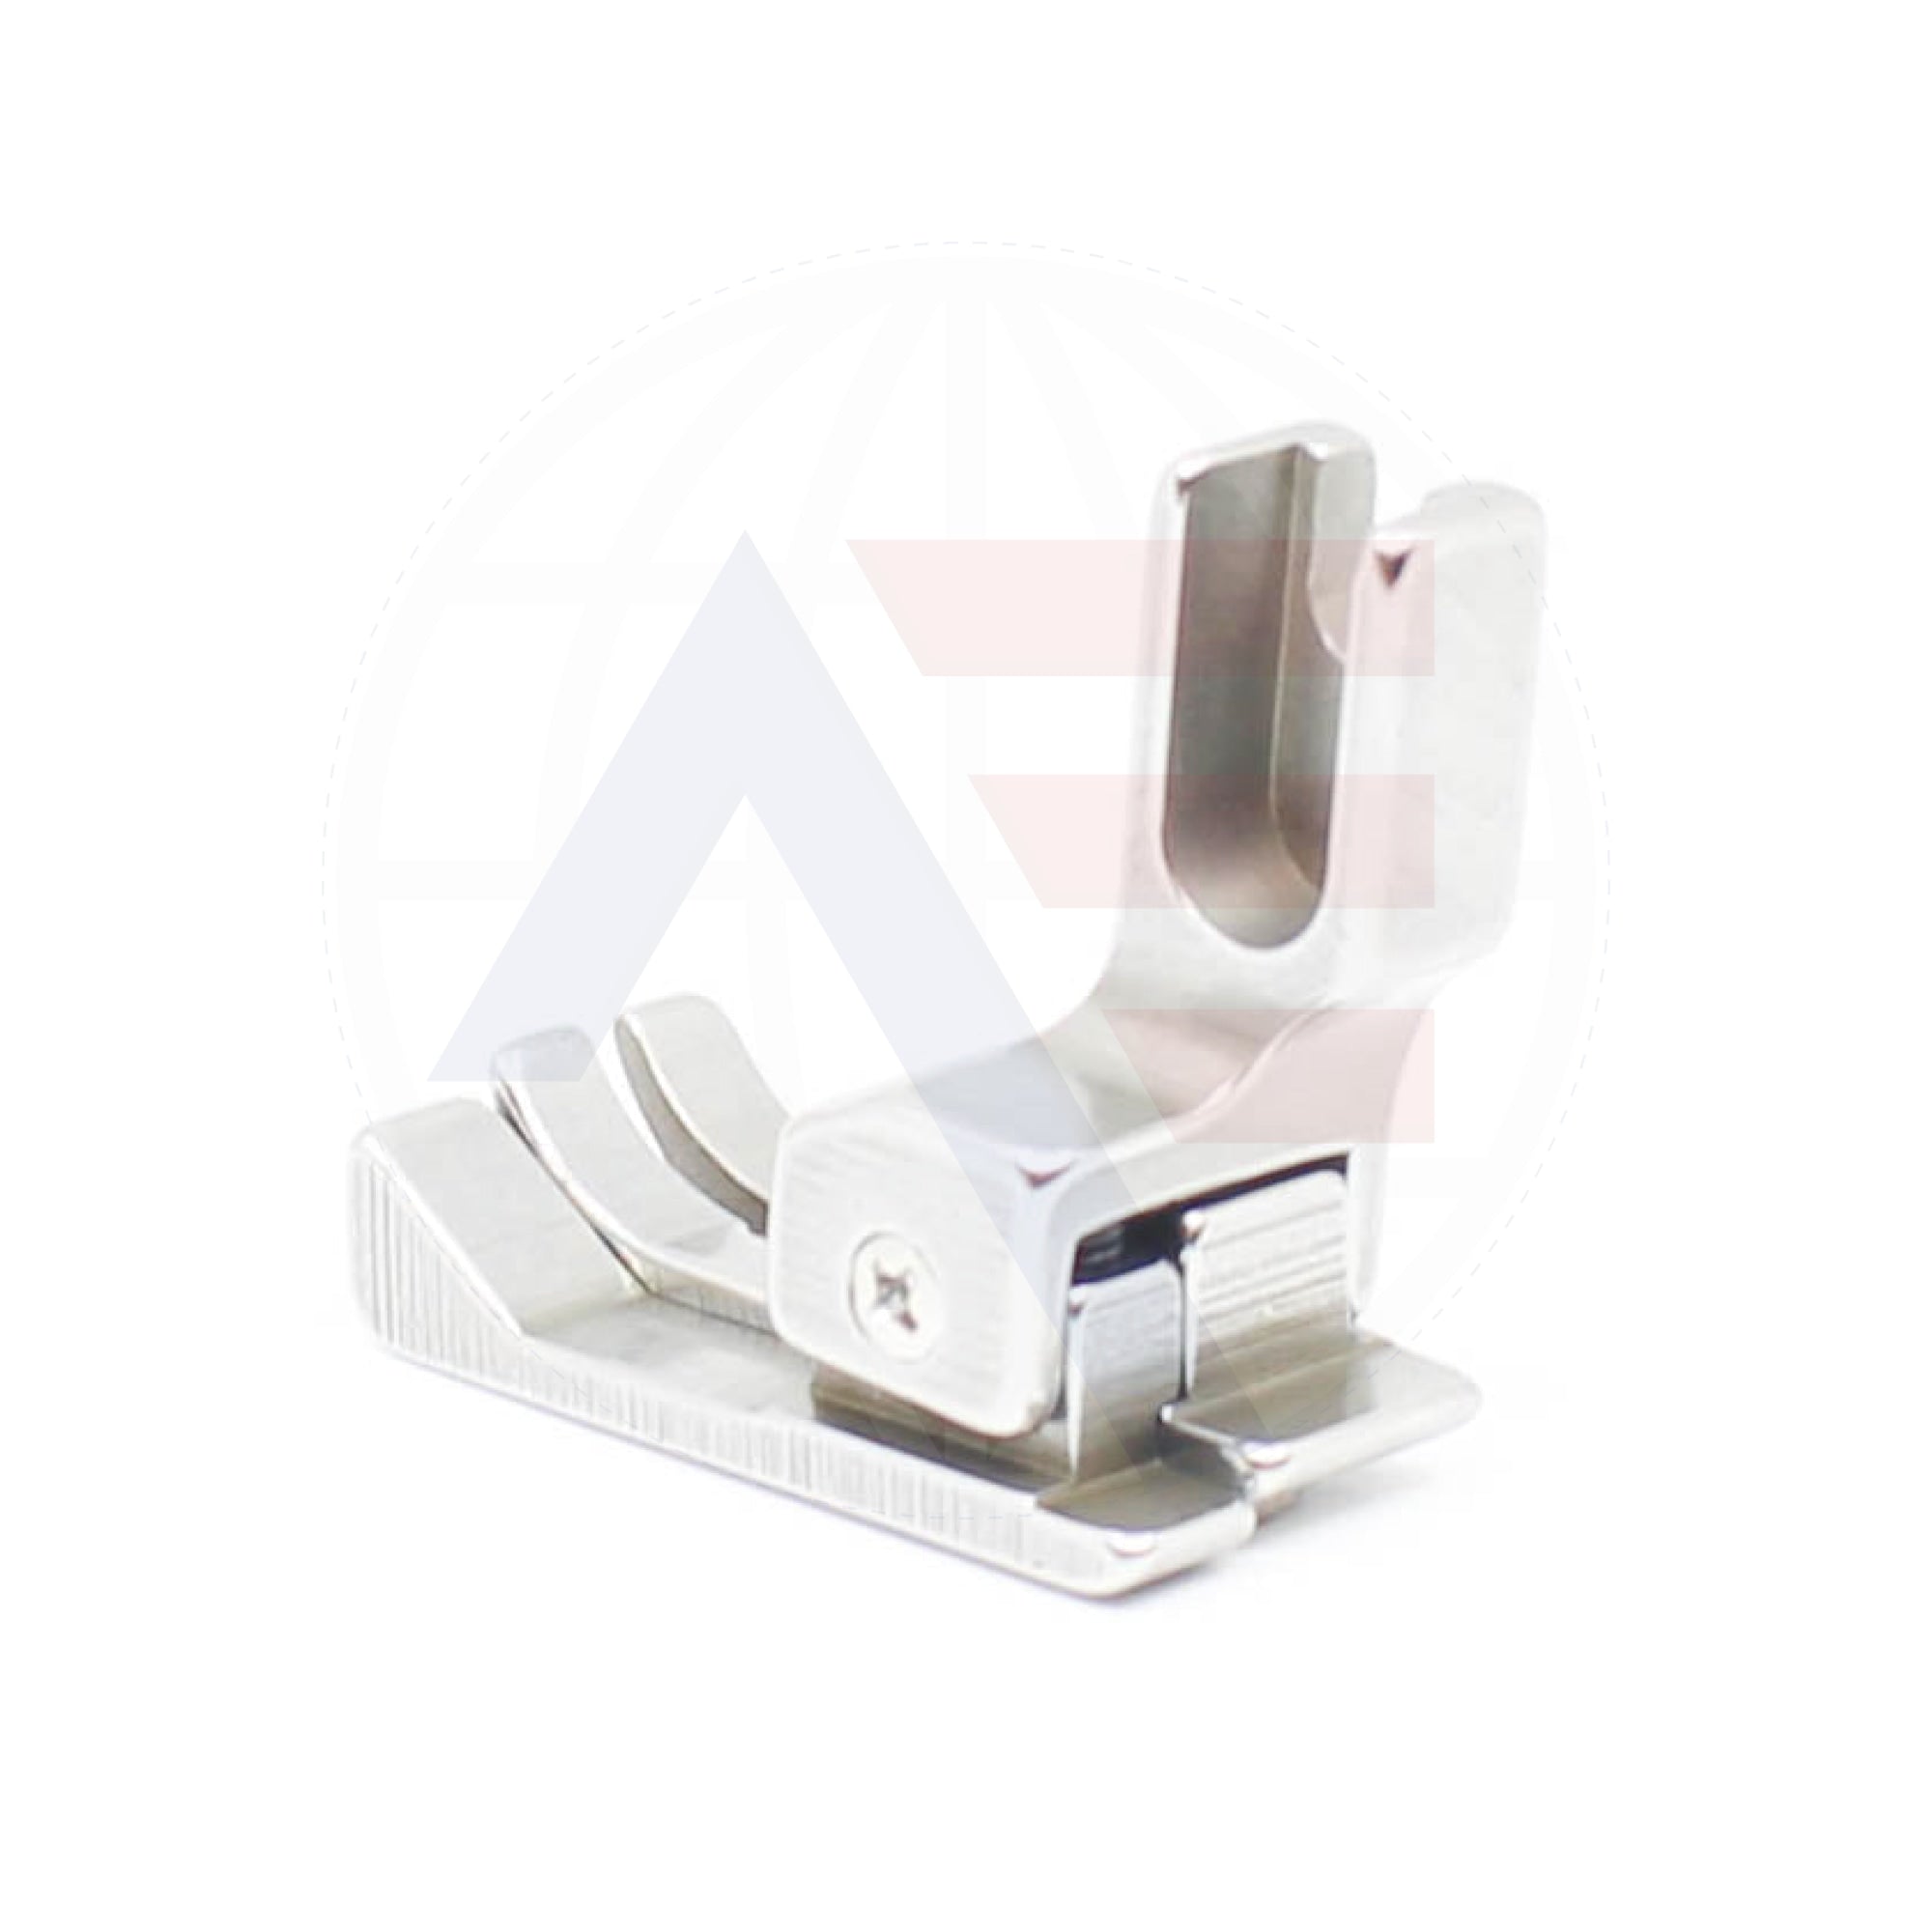 213Nf Compensating Foot Sewing Machine Spare Parts